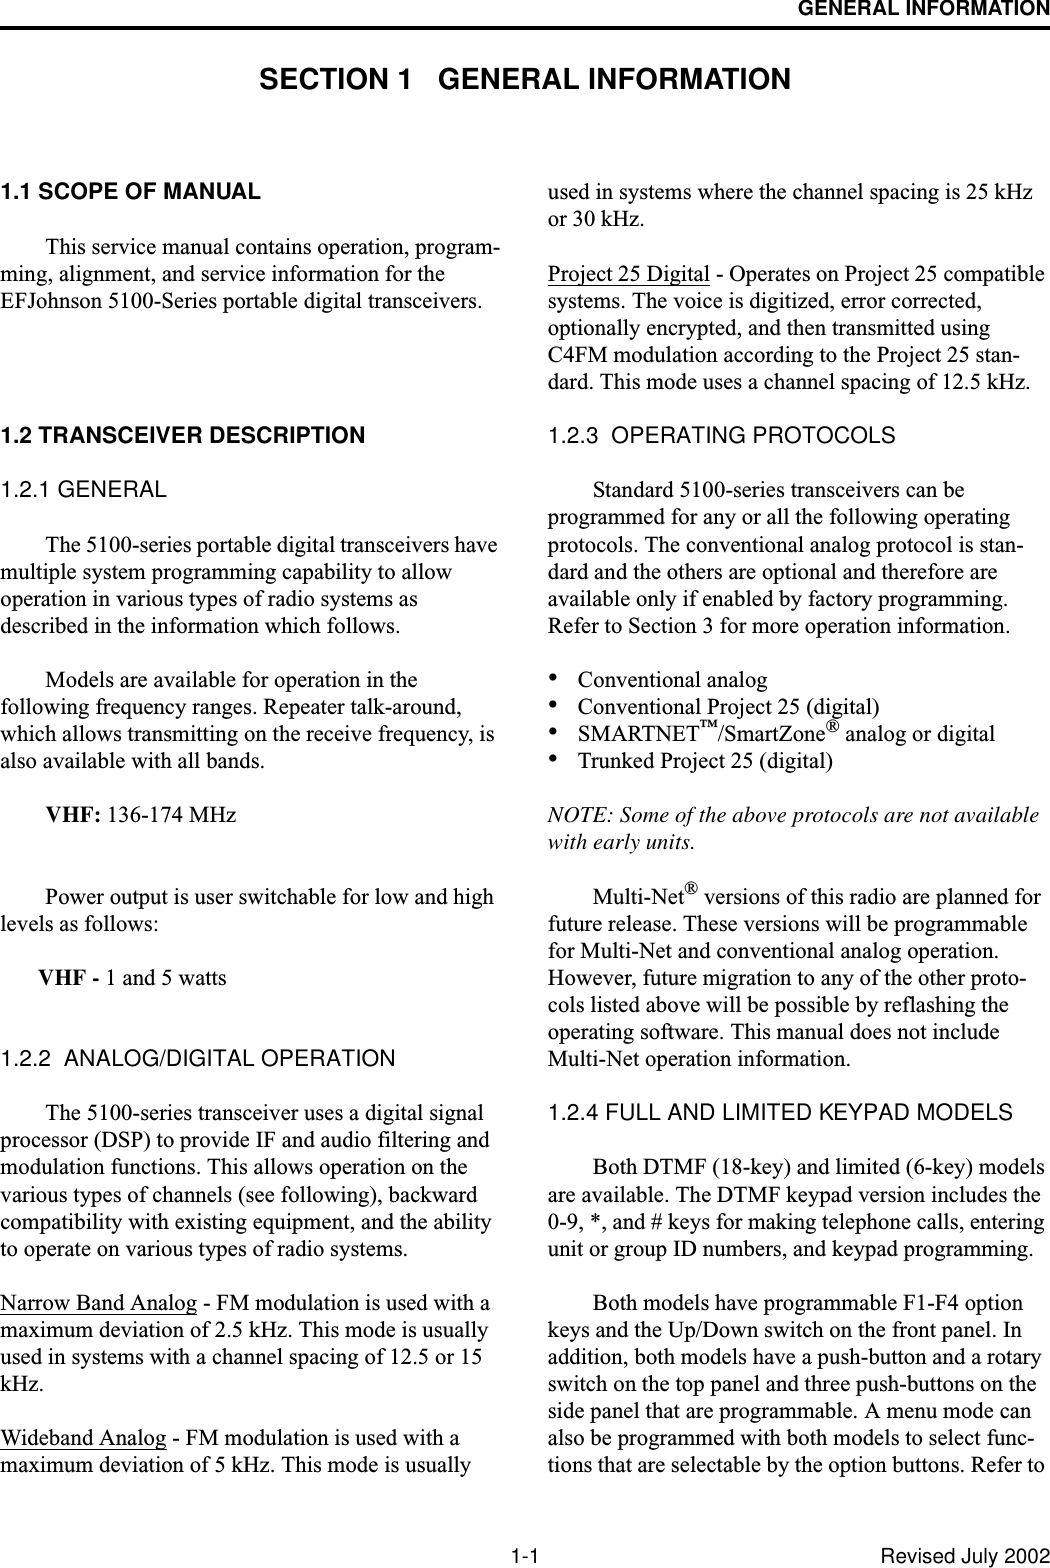 1-1 Revised July 2002GENERAL INFORMATIONSECTION 1   GENERAL INFORMATION1.1 SCOPE OF MANUALThis service manual contains operation, program-ming, alignment, and service information for the EFJohnson 5100-Series portable digital transceivers.1.2 TRANSCEIVER DESCRIPTION1.2.1 GENERALThe 5100-series portable digital transceivers have multiple system programming capability to allow operation in various types of radio systems as described in the information which follows. Models are available for operation in the following frequency ranges. Repeater talk-around, which allows transmitting on the receive frequency, is also available with all bands. VHF: 136-174 MHzPower output is user switchable for low and high levels as follows: VHF - 1 and 5 watts1.2.2  ANALOG/DIGITAL OPERATIONThe 5100-series transceiver uses a digital signal processor (DSP) to provide IF and audio filtering and modulation functions. This allows operation on the various types of channels (see following), backward compatibility with existing equipment, and the ability to operate on various types of radio systems.Narrow Band Analog - FM modulation is used with a maximum deviation of 2.5 kHz. This mode is usually used in systems with a channel spacing of 12.5 or 15 kHz.Wideband Analog - FM modulation is used with a maximum deviation of 5 kHz. This mode is usually used in systems where the channel spacing is 25 kHz or 30 kHz. Project 25 Digital - Operates on Project 25 compatible systems. The voice is digitized, error corrected, optionally encrypted, and then transmitted using C4FM modulation according to the Project 25 stan-dard. This mode uses a channel spacing of 12.5 kHz.1.2.3  OPERATING PROTOCOLSStandard 5100-series transceivers can be programmed for any or all the following operating protocols. The conventional analog protocol is stan-dard and the others are optional and therefore are available only if enabled by factory programming. Refer to Section 3 for more operation information.•Conventional analog•Conventional Project 25 (digital)•SMARTNET™/SmartZone® analog or digital•Trunked Project 25 (digital)NOTE: Some of the above protocols are not available with early units. Multi-Net® versions of this radio are planned for future release. These versions will be programmable for Multi-Net and conventional analog operation. However, future migration to any of the other proto-cols listed above will be possible by reflashing the operating software. This manual does not include Multi-Net operation information.1.2.4 FULL AND LIMITED KEYPAD MODELSBoth DTMF (18-key) and limited (6-key) models are available. The DTMF keypad version includes the 0-9, *, and # keys for making telephone calls, entering unit or group ID numbers, and keypad programming.Both models have programmable F1-F4 option keys and the Up/Down switch on the front panel. In addition, both models have a push-button and a rotary switch on the top panel and three push-buttons on the side panel that are programmable. A menu mode can also be programmed with both models to select func-tions that are selectable by the option buttons. Refer to 